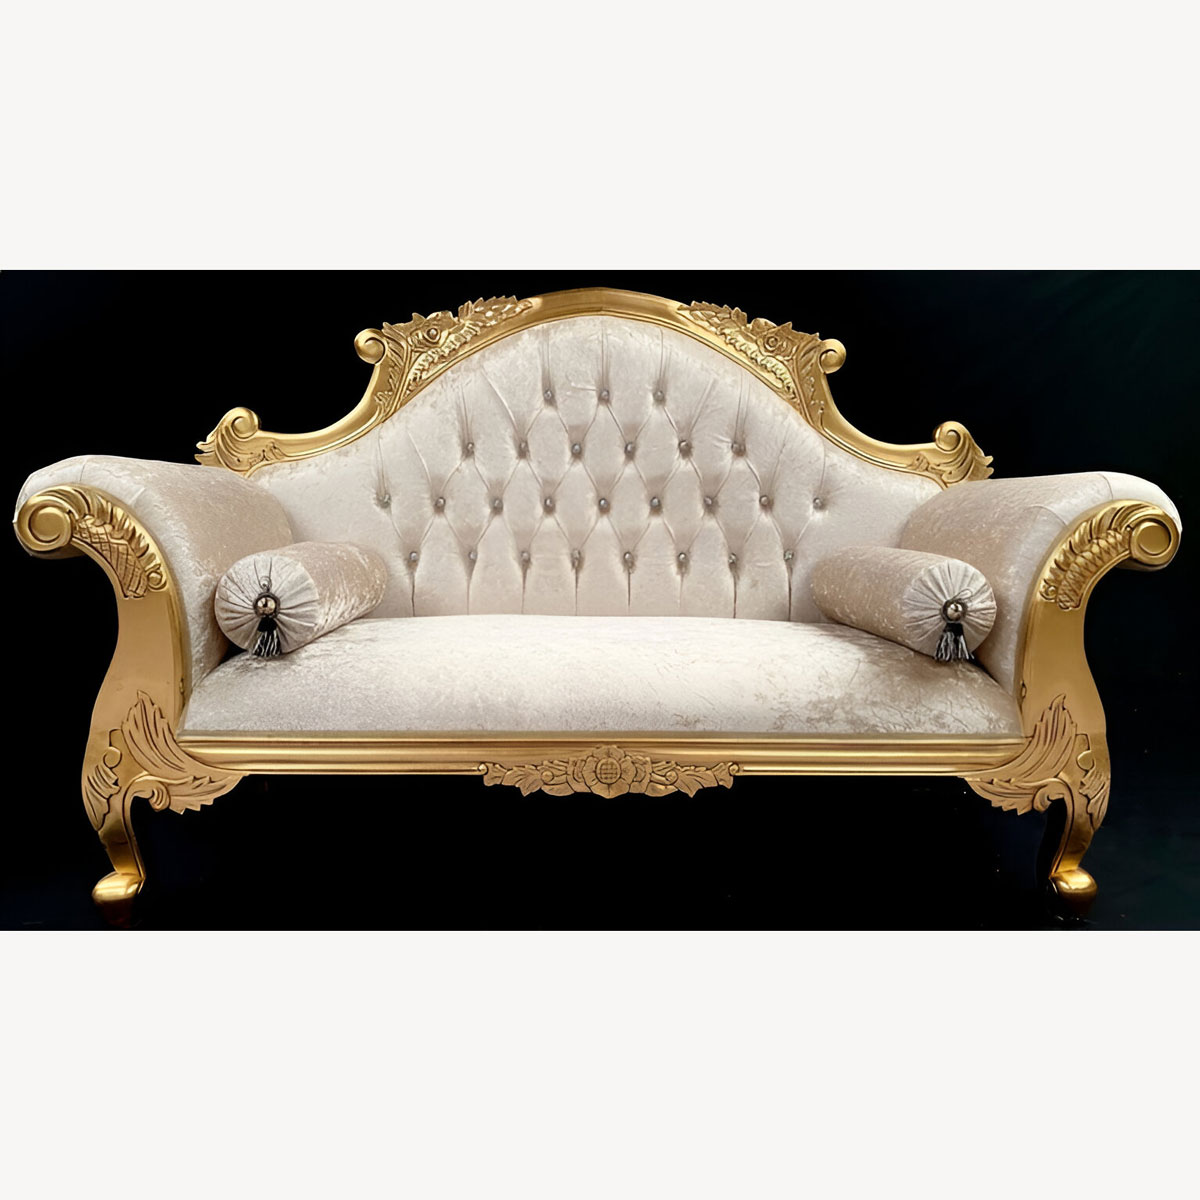 Charles Louis Cuddler Love Seat Chaise Sofa In Gold Leaf Frame Upholstered In Ivory Cream Crushed Velvet With Crystal Buttoning 1 - Hampshire Barn Interiors - Charles Louis Cuddler Love Seat Chaise Sofa In Gold Leaf Frame Upholstered In Ivory Cream Crushed Velvet With Crystal Buttoning -